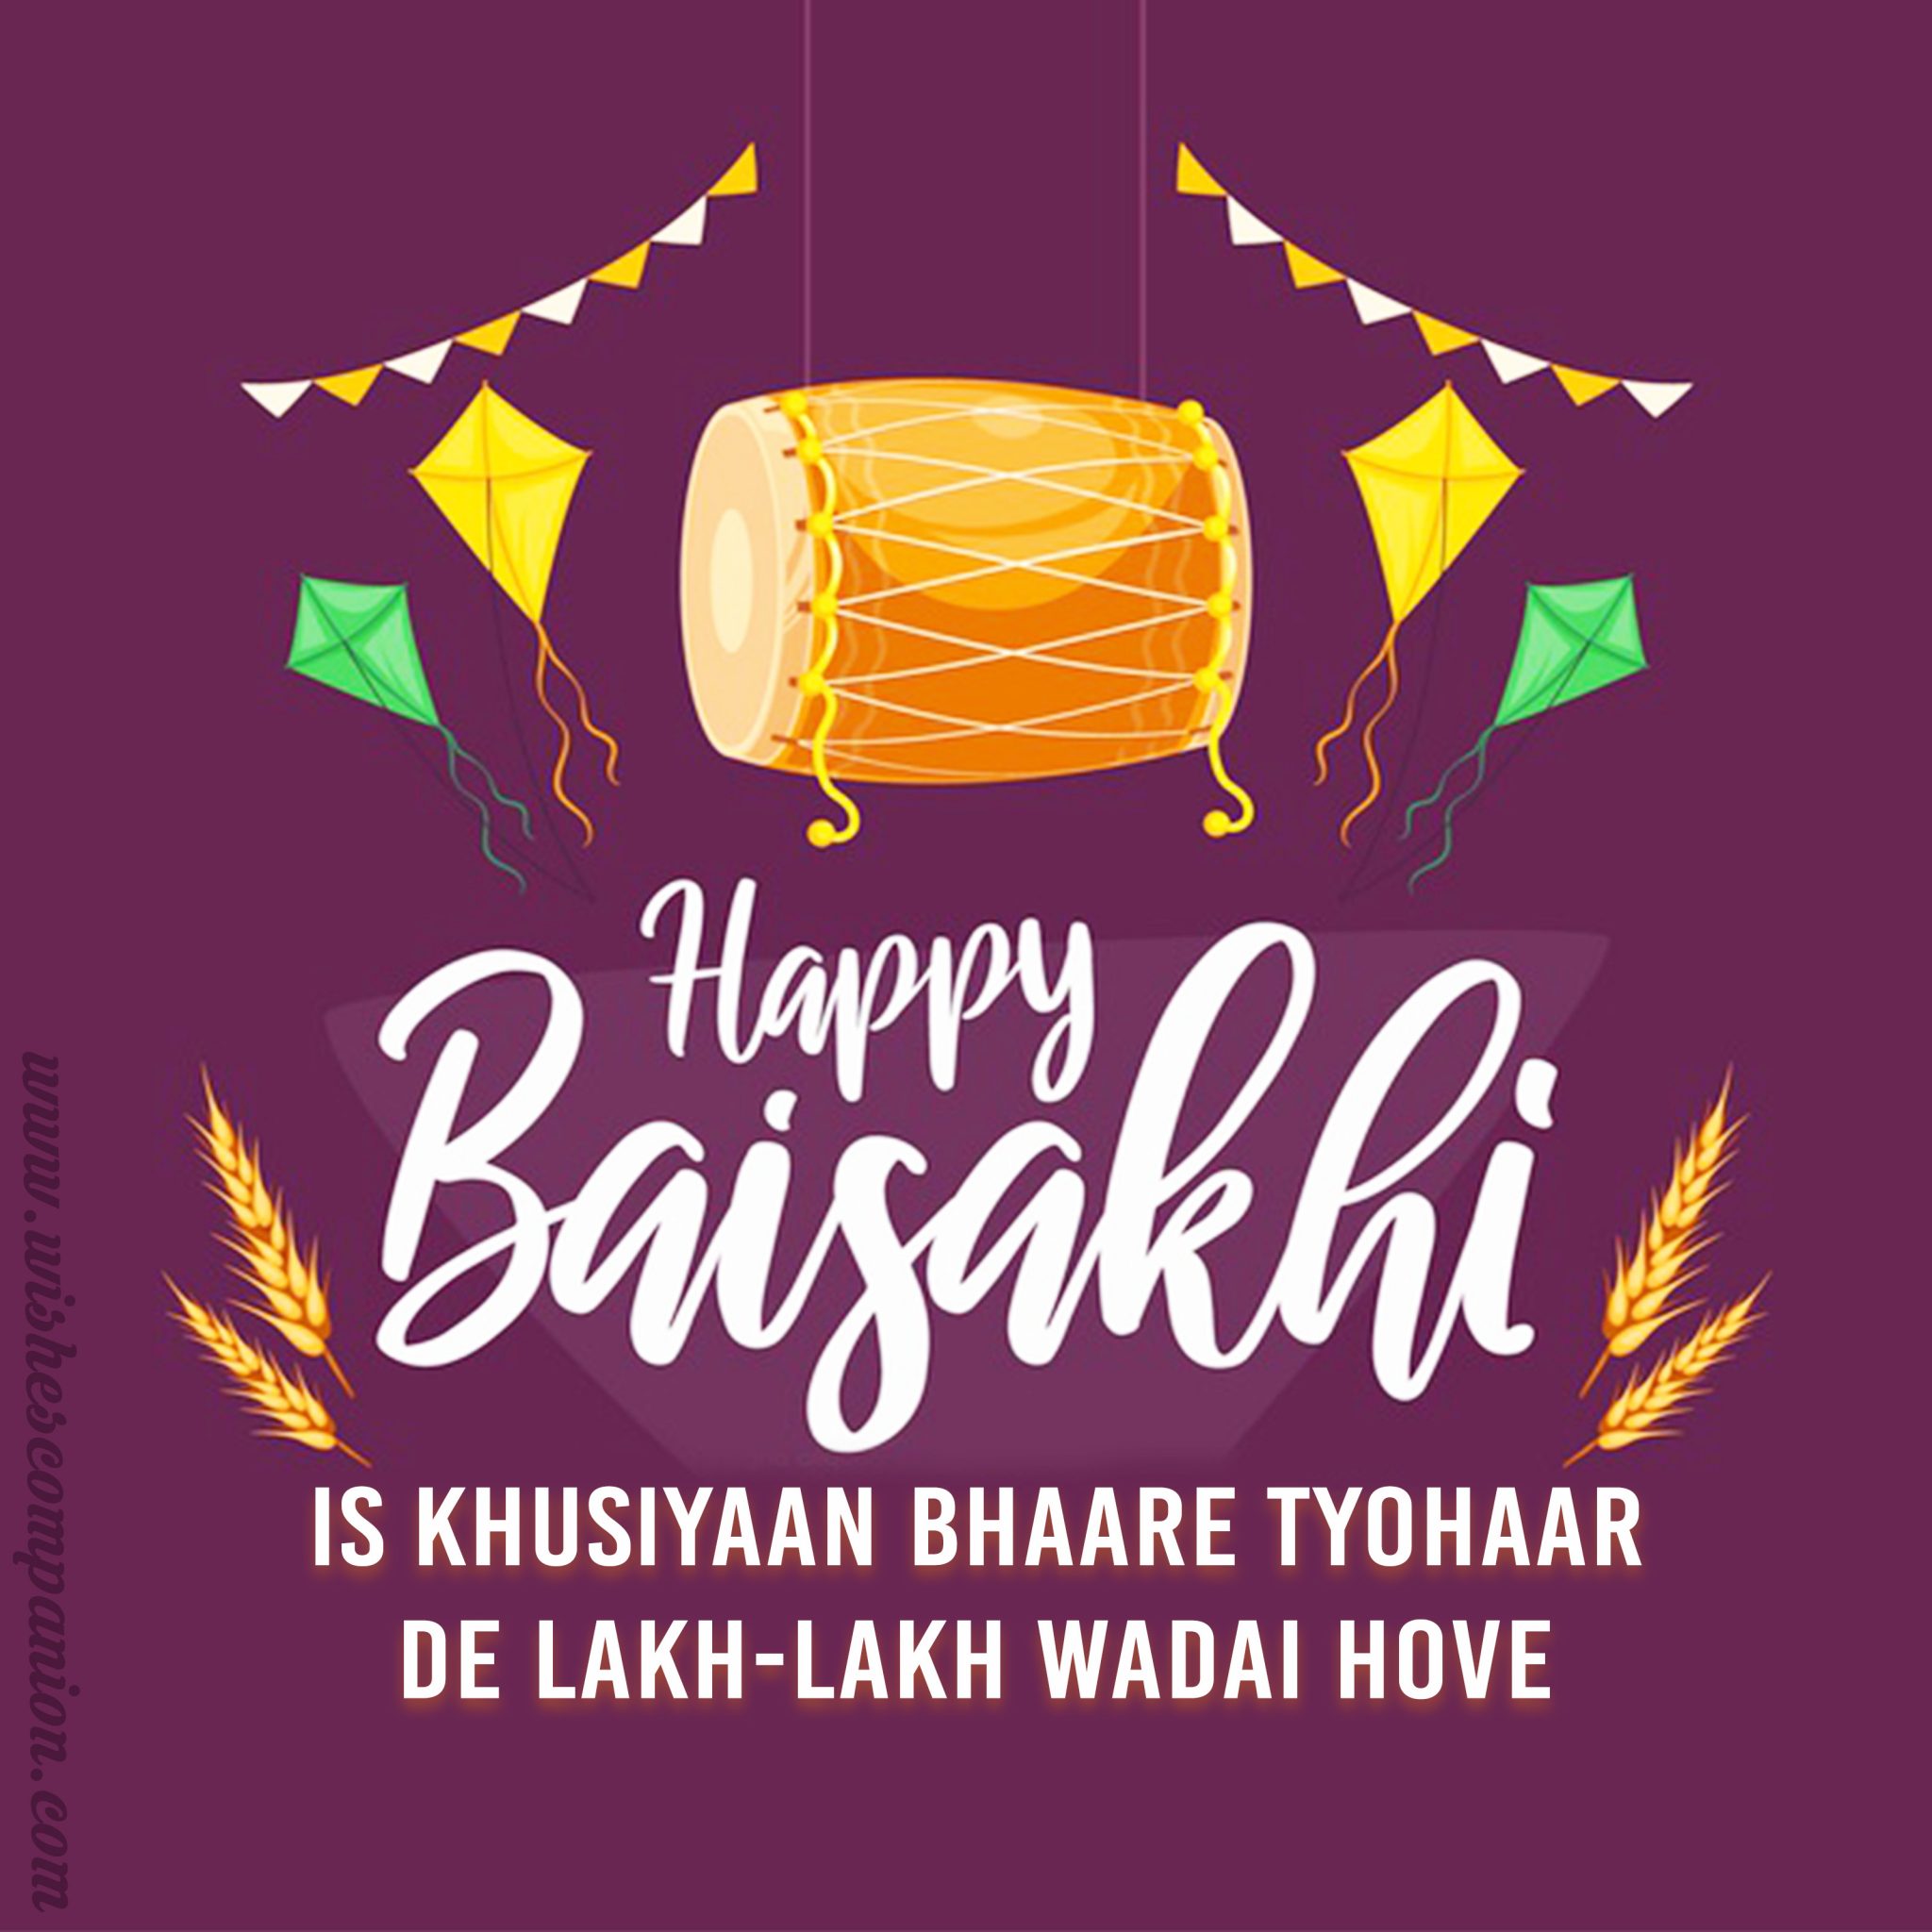 30+ Best Baisakhi Wishes and Messages Wishes Companion